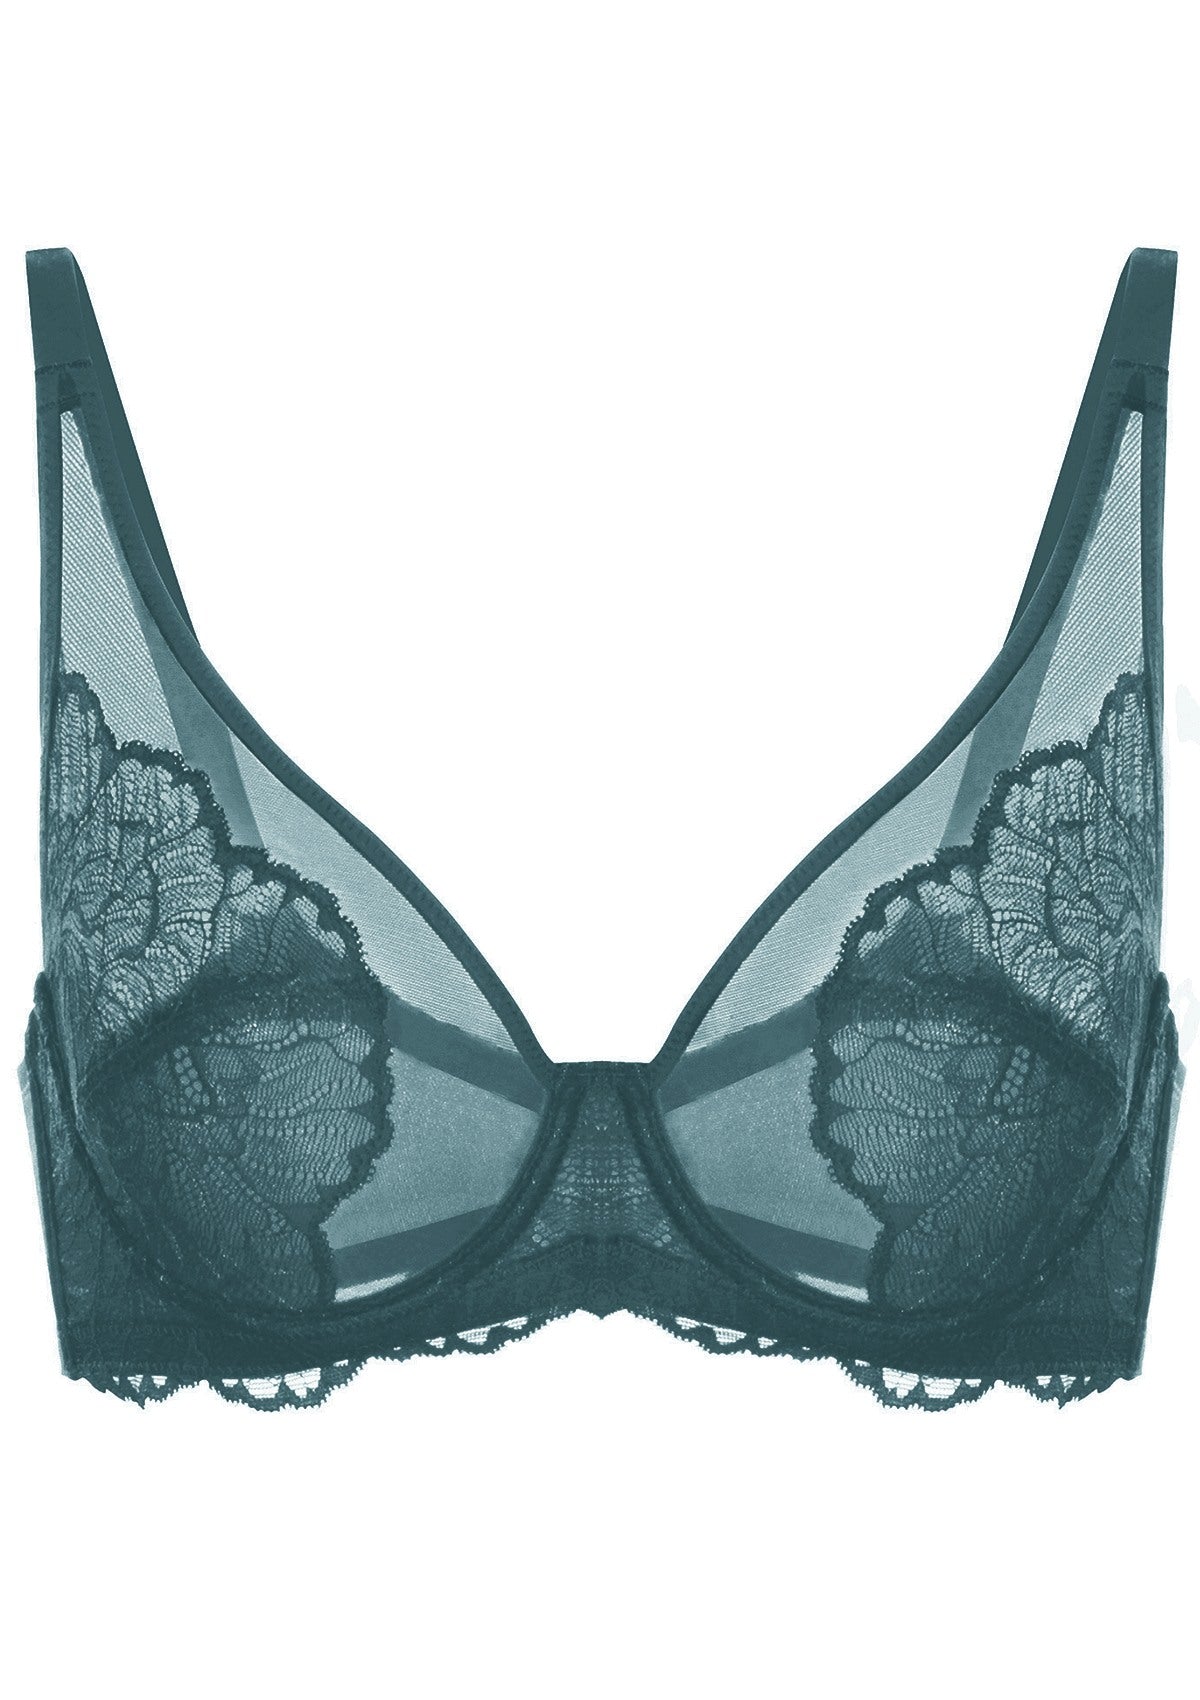 HSIA Blossom Full Figure See-Through Lace Bra For Side And Back Fat - Dark Blue / 36 / C